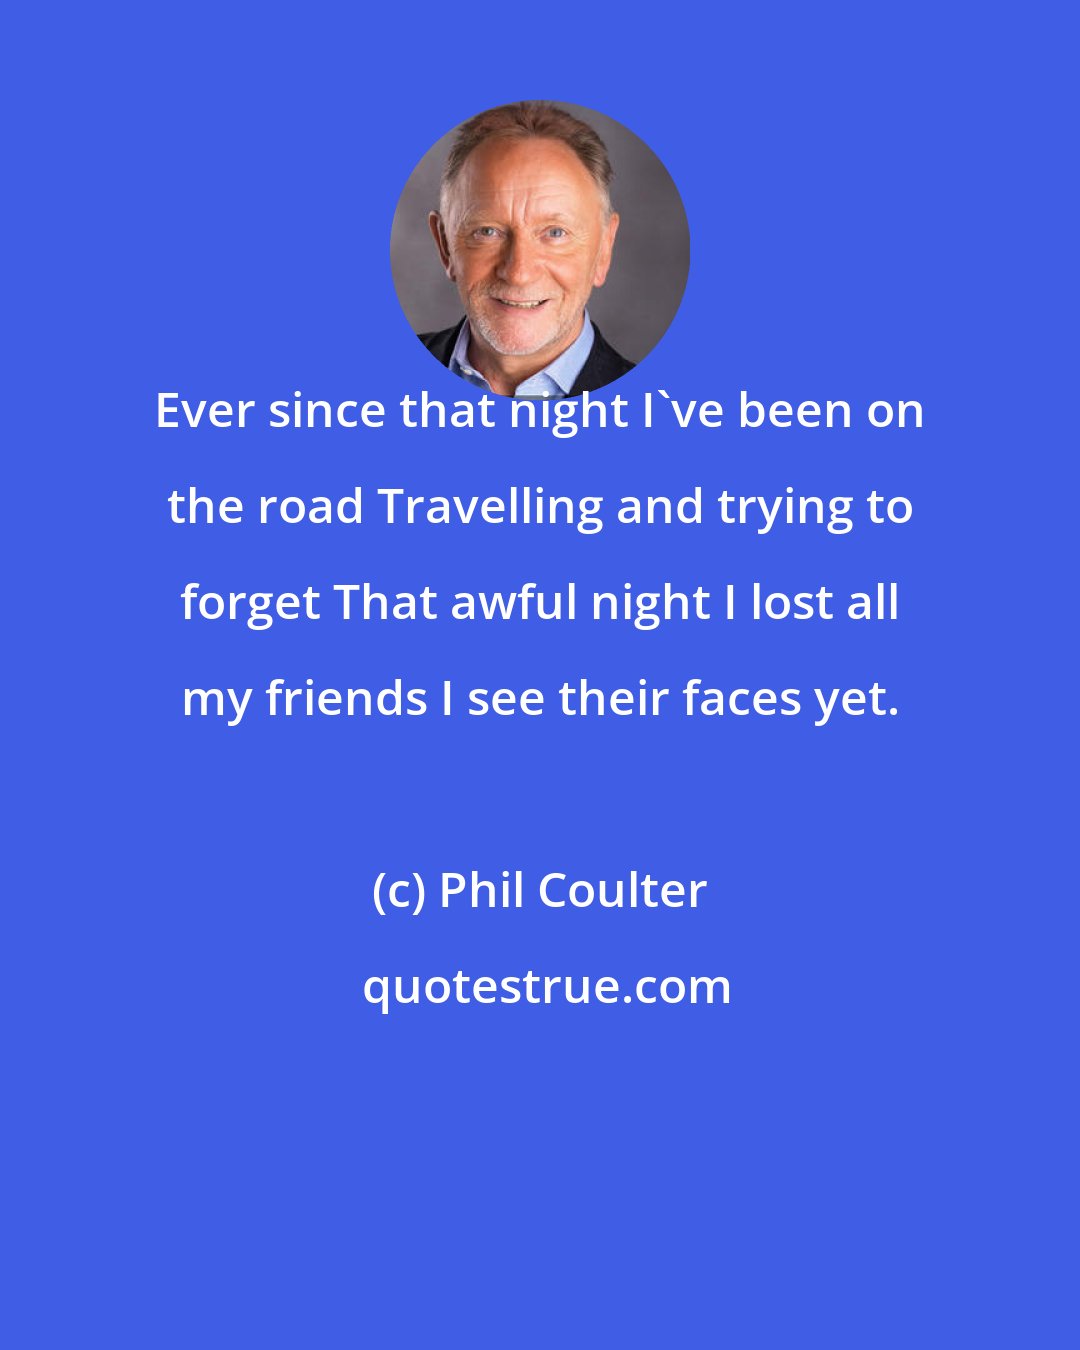 Phil Coulter: Ever since that night I've been on the road Travelling and trying to forget That awful night I lost all my friends I see their faces yet.